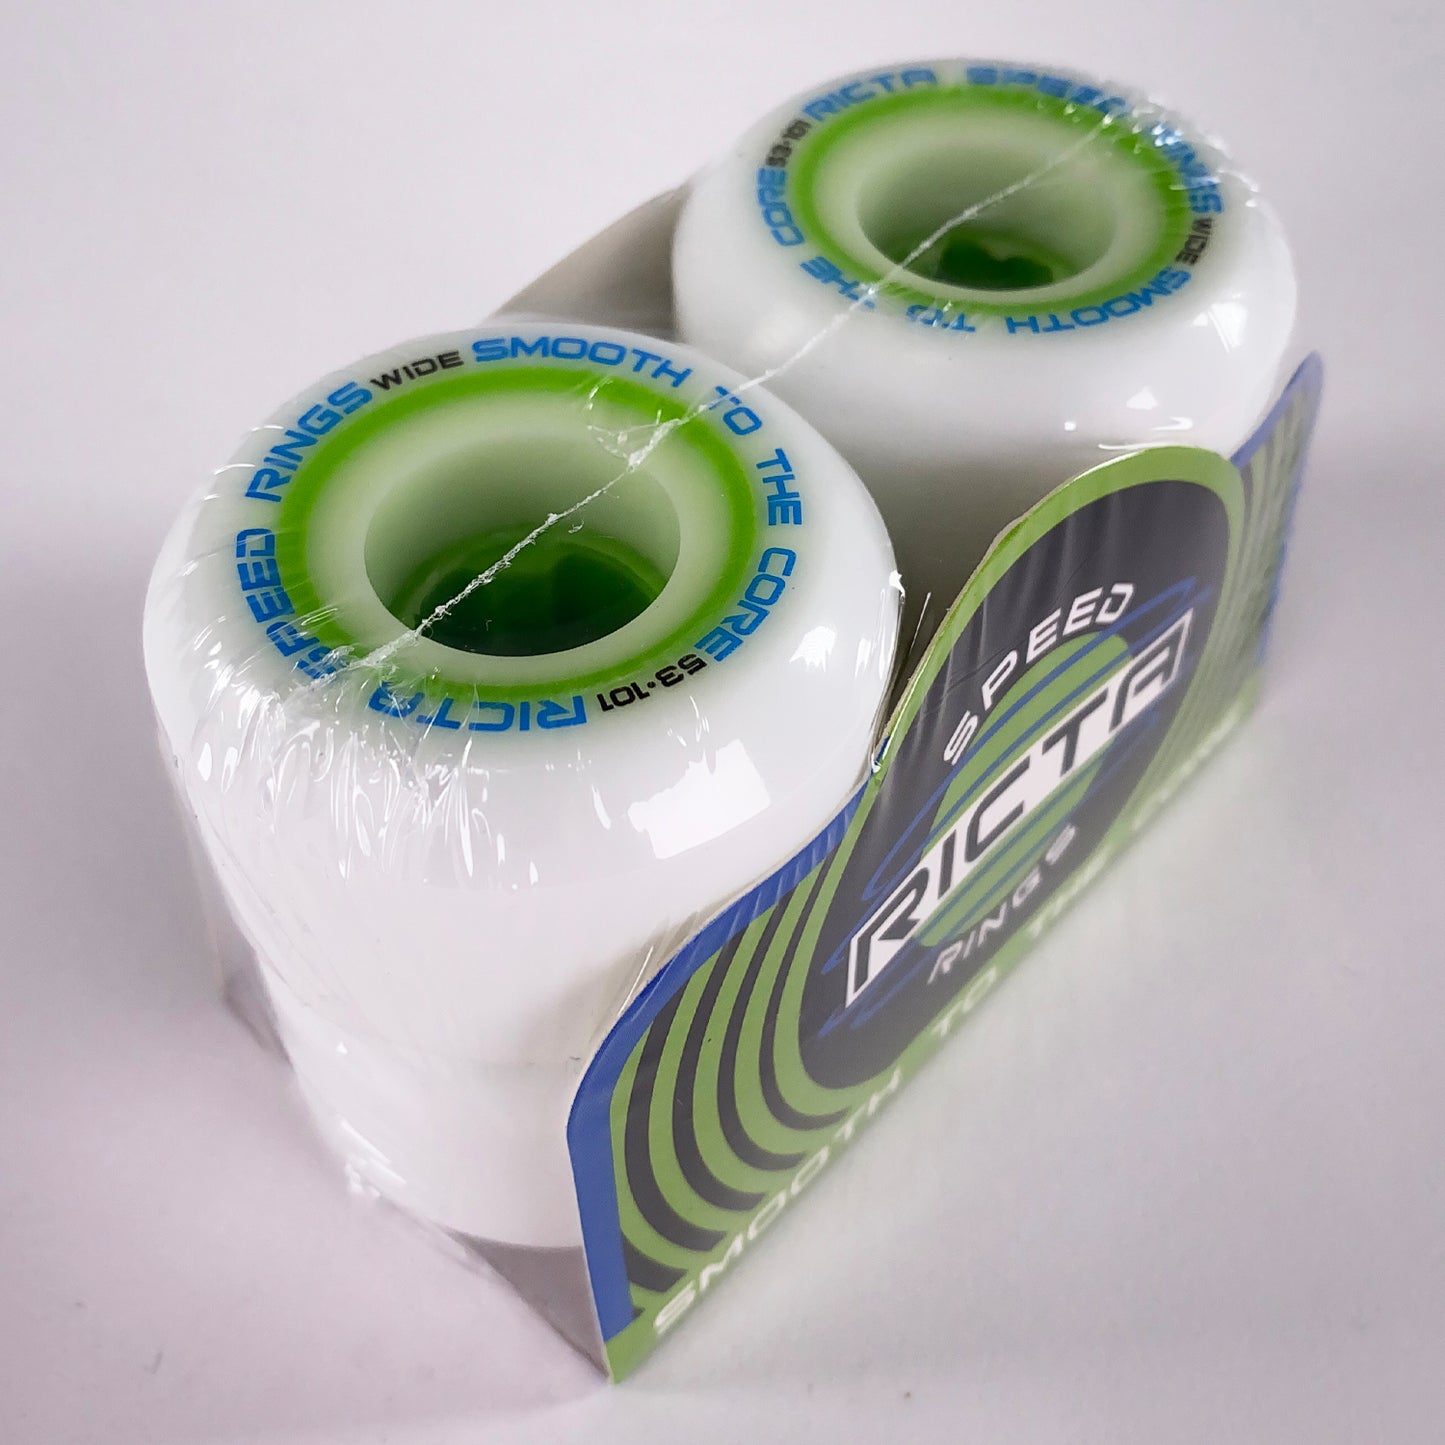 Ricta Wheels Speedrings 101a White / Green 53mm - Prime Delux Store